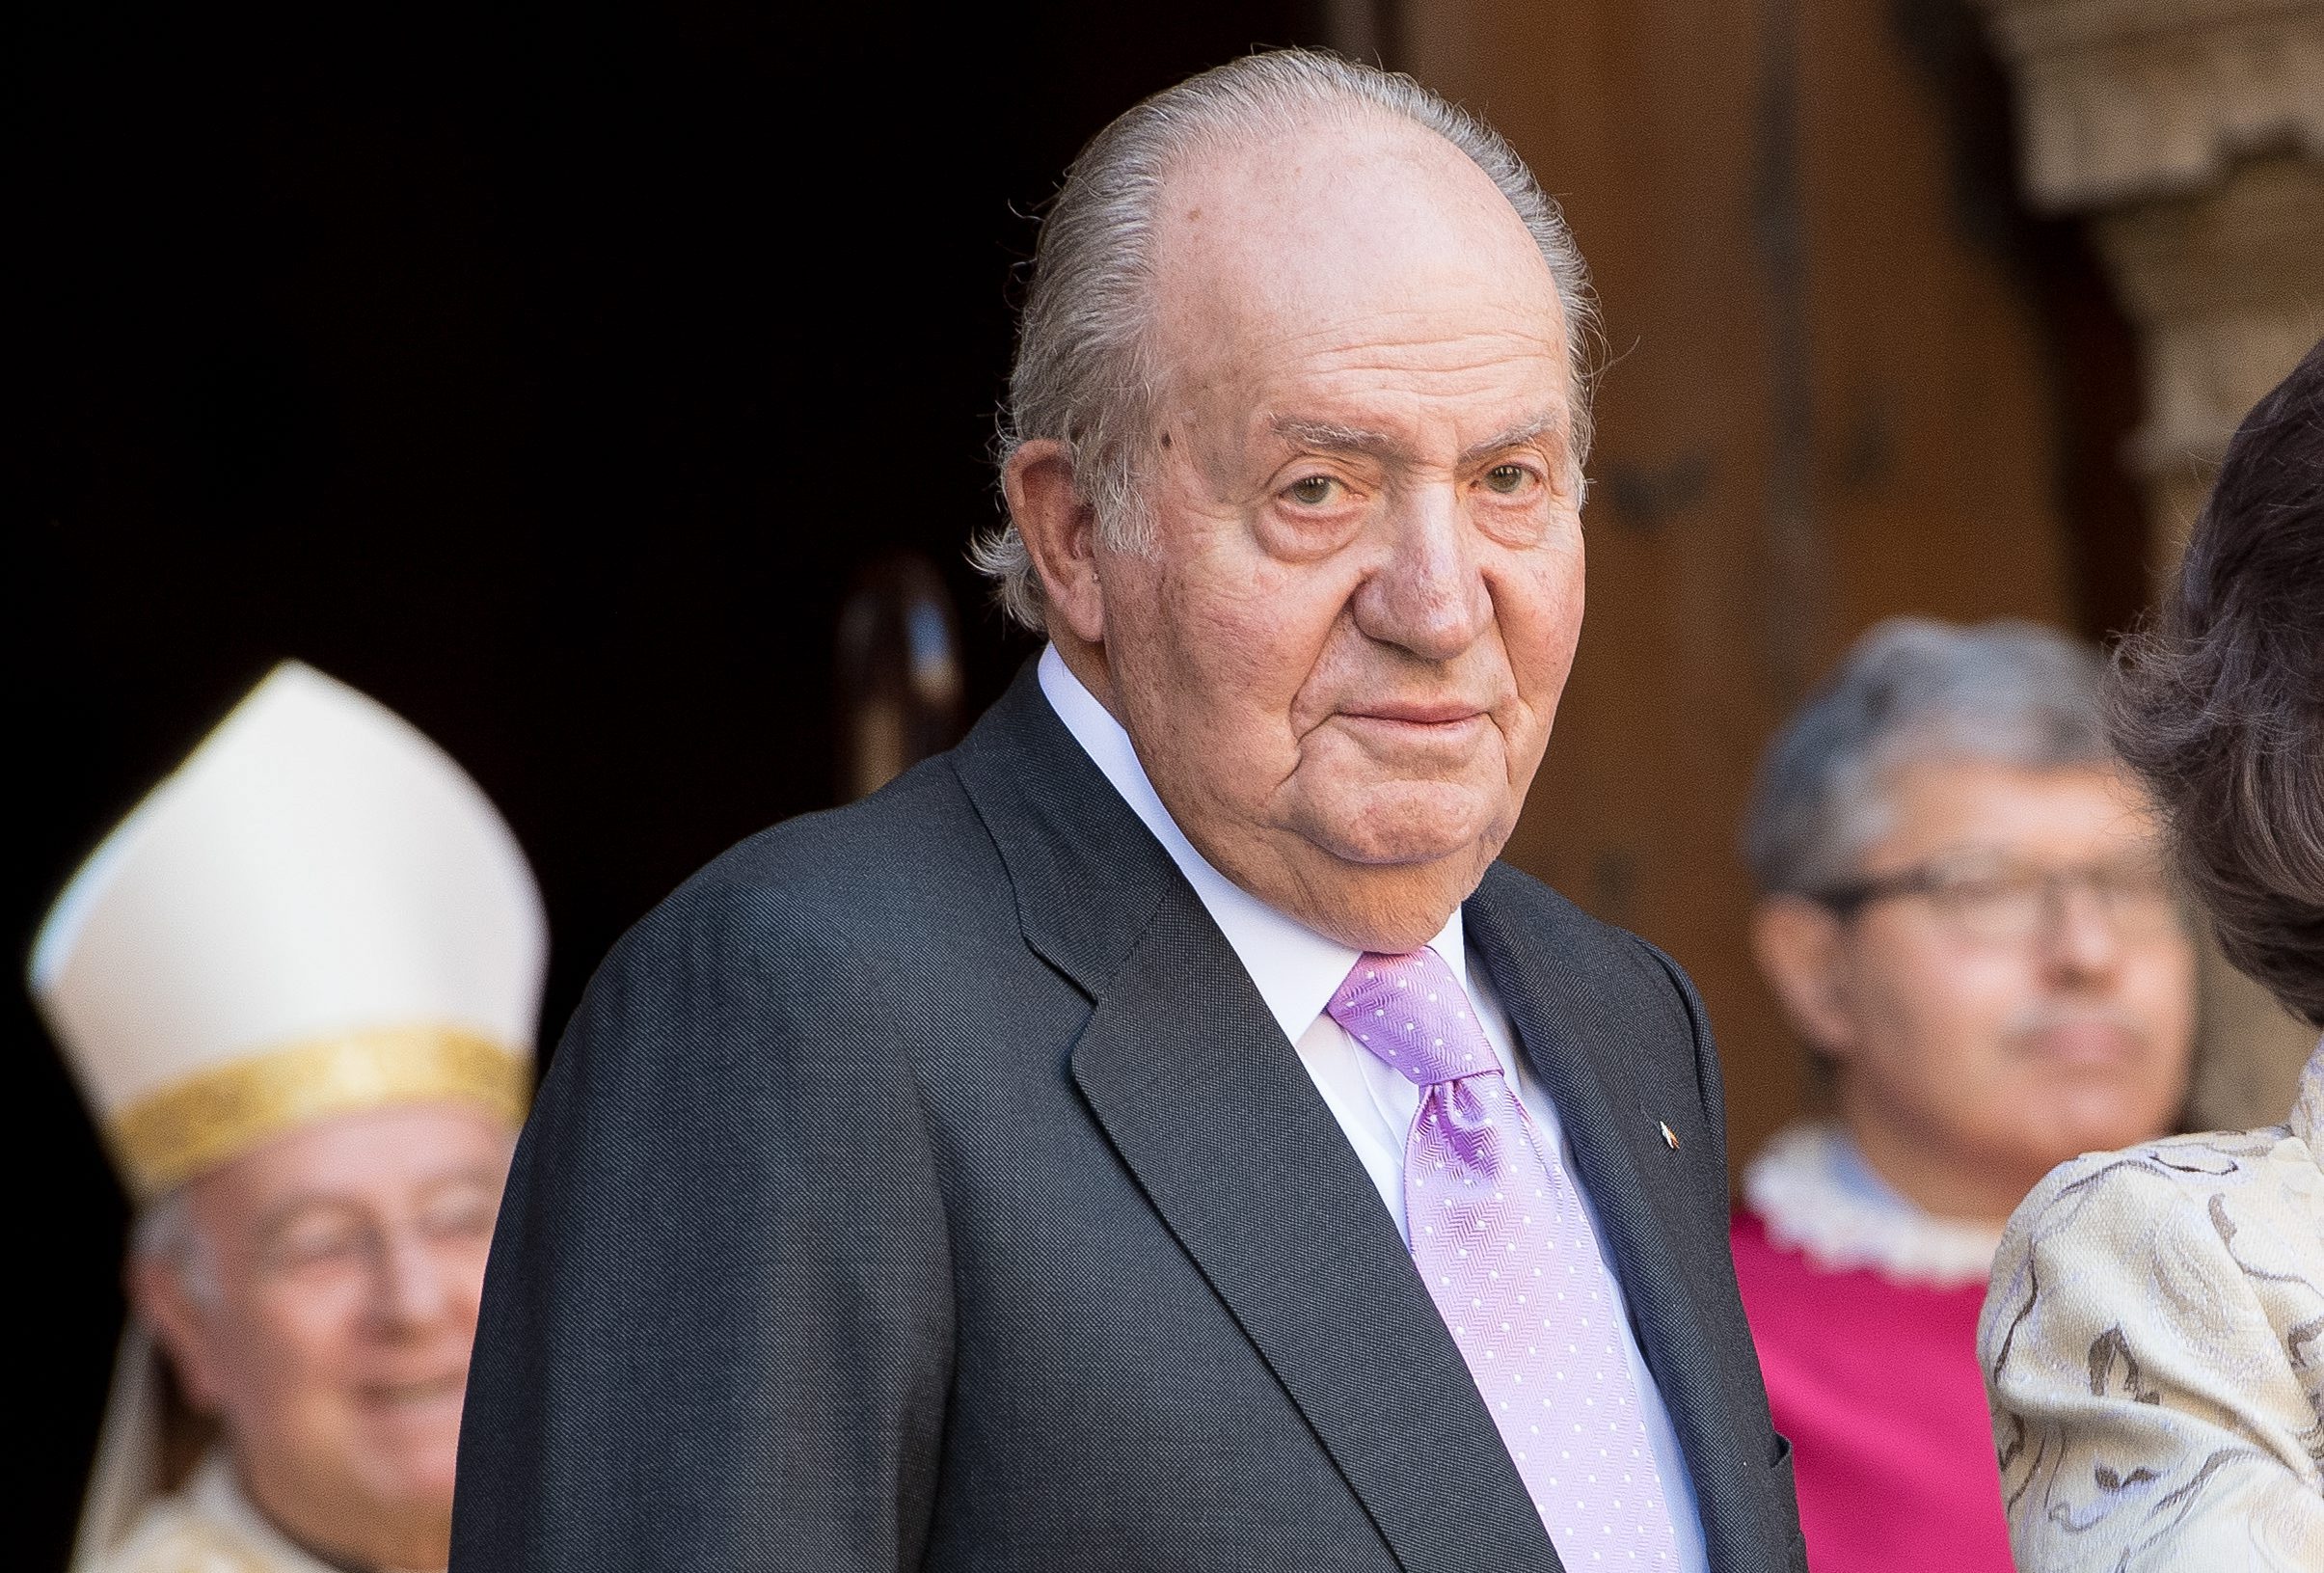 High Court in London rejects sovereign immunity for Spain's Emeritus King, Juan Carlos, over damages claim by ex-mistress